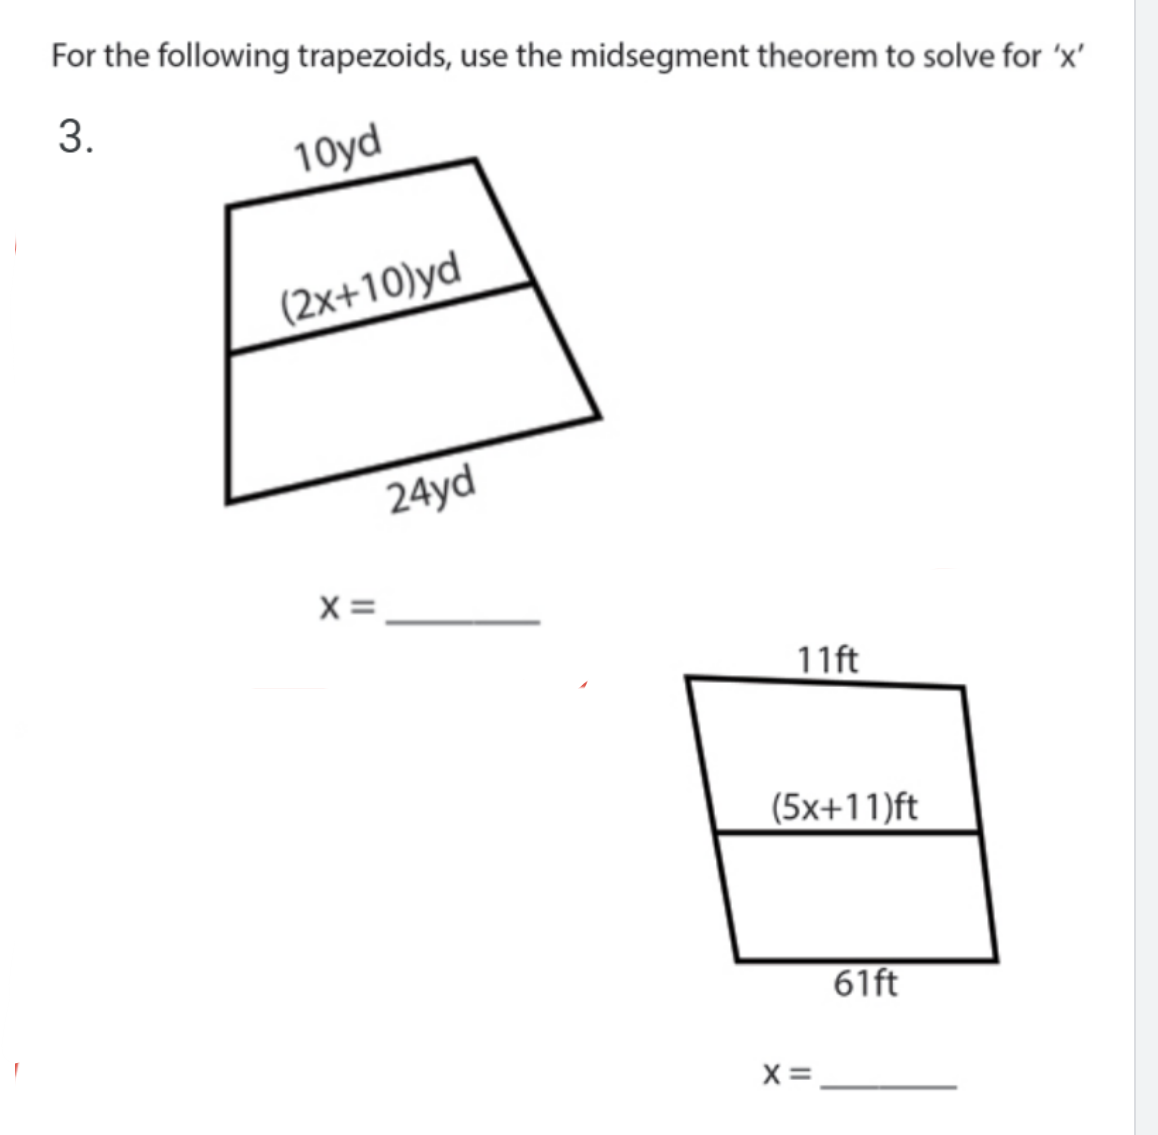 For the following trapezoids, use the midsegment theorem to solve for 'x'
3.
10yd
(2x+10)yd
24yd
x =
11ft
(5x+11)ft
61ft
X=
